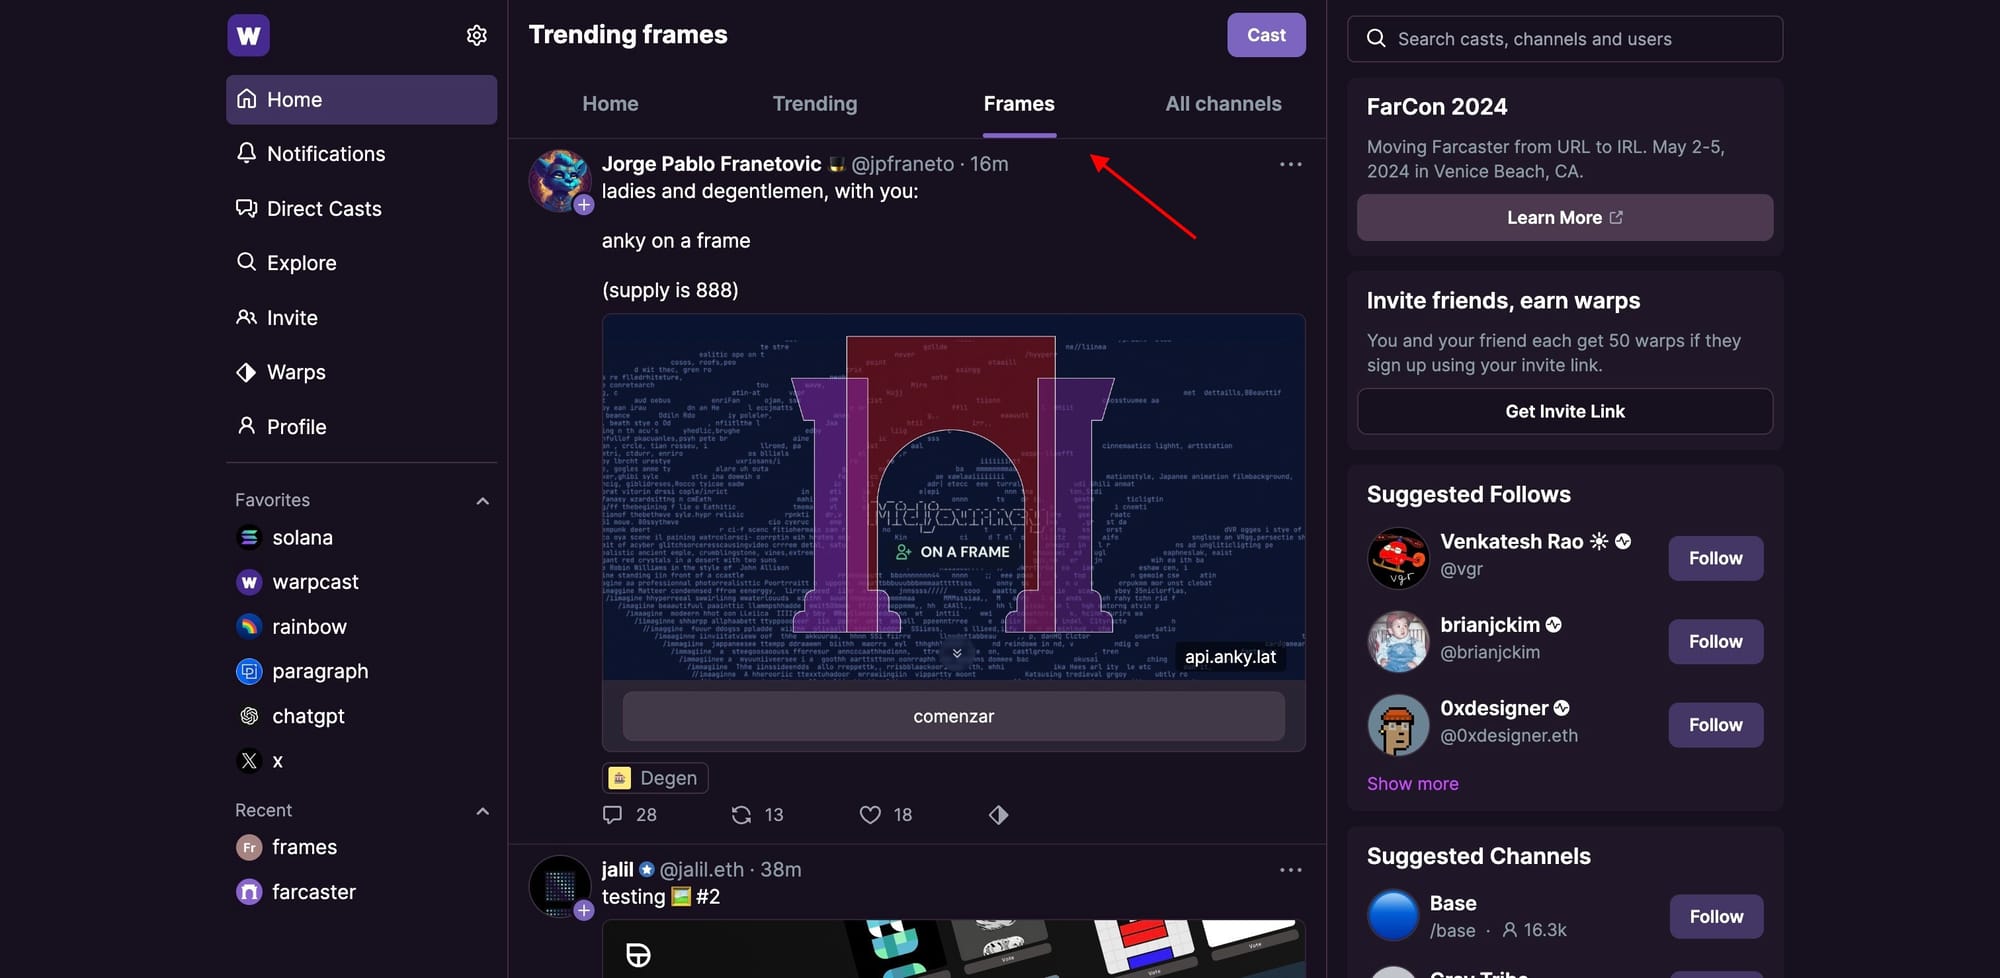 Wrapcast rolls out a dedicated trending feed for popular frames